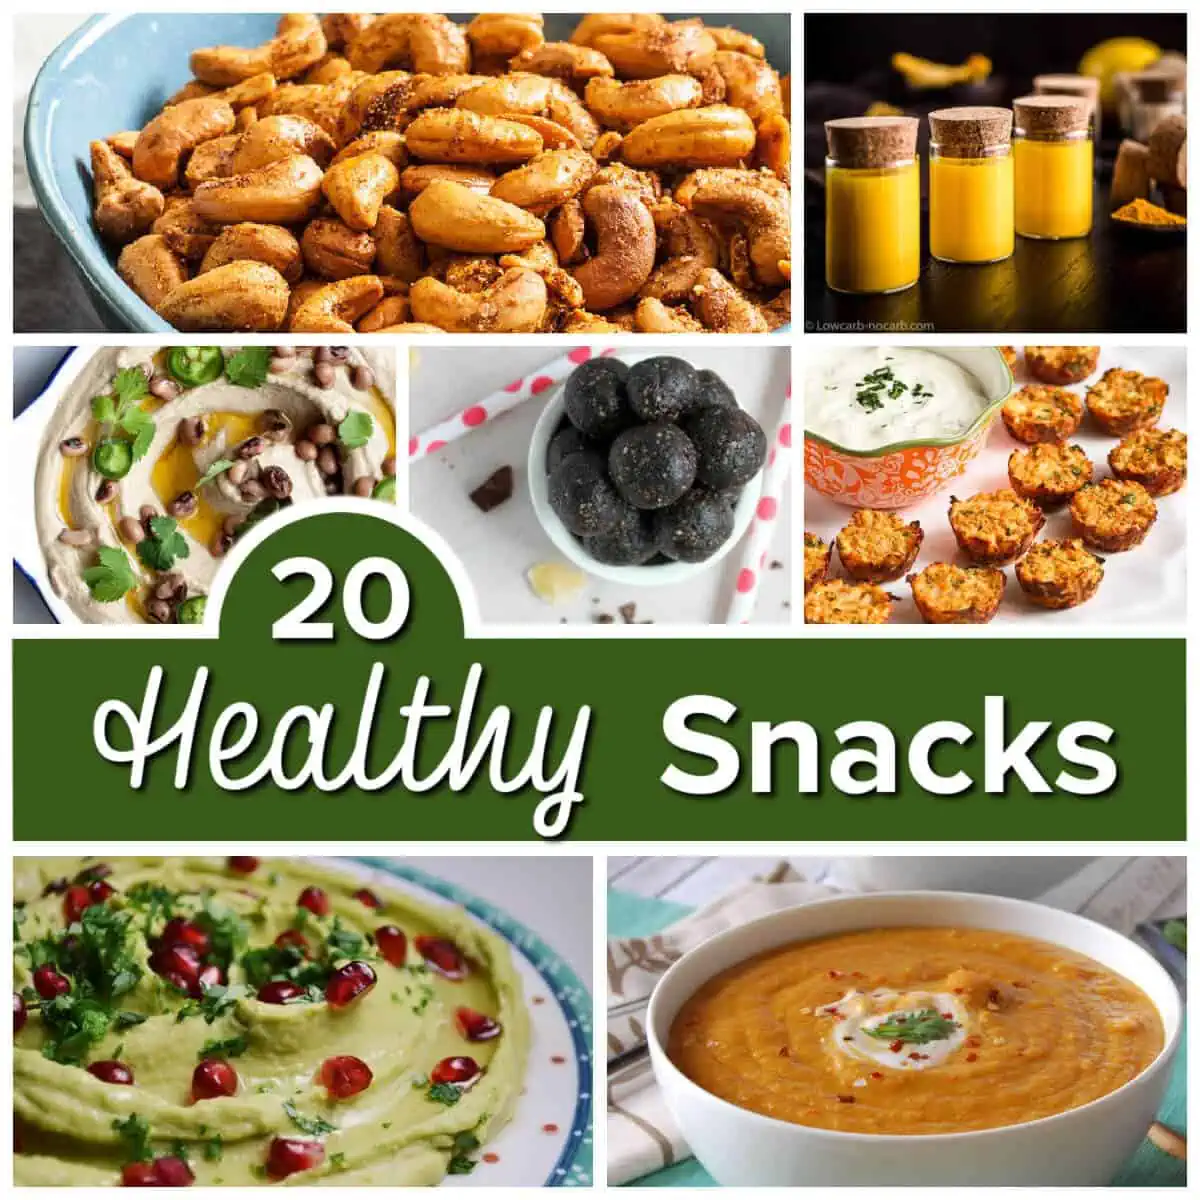 Collection of delicious snacks with text overlay saying 20 Healthy Snacks